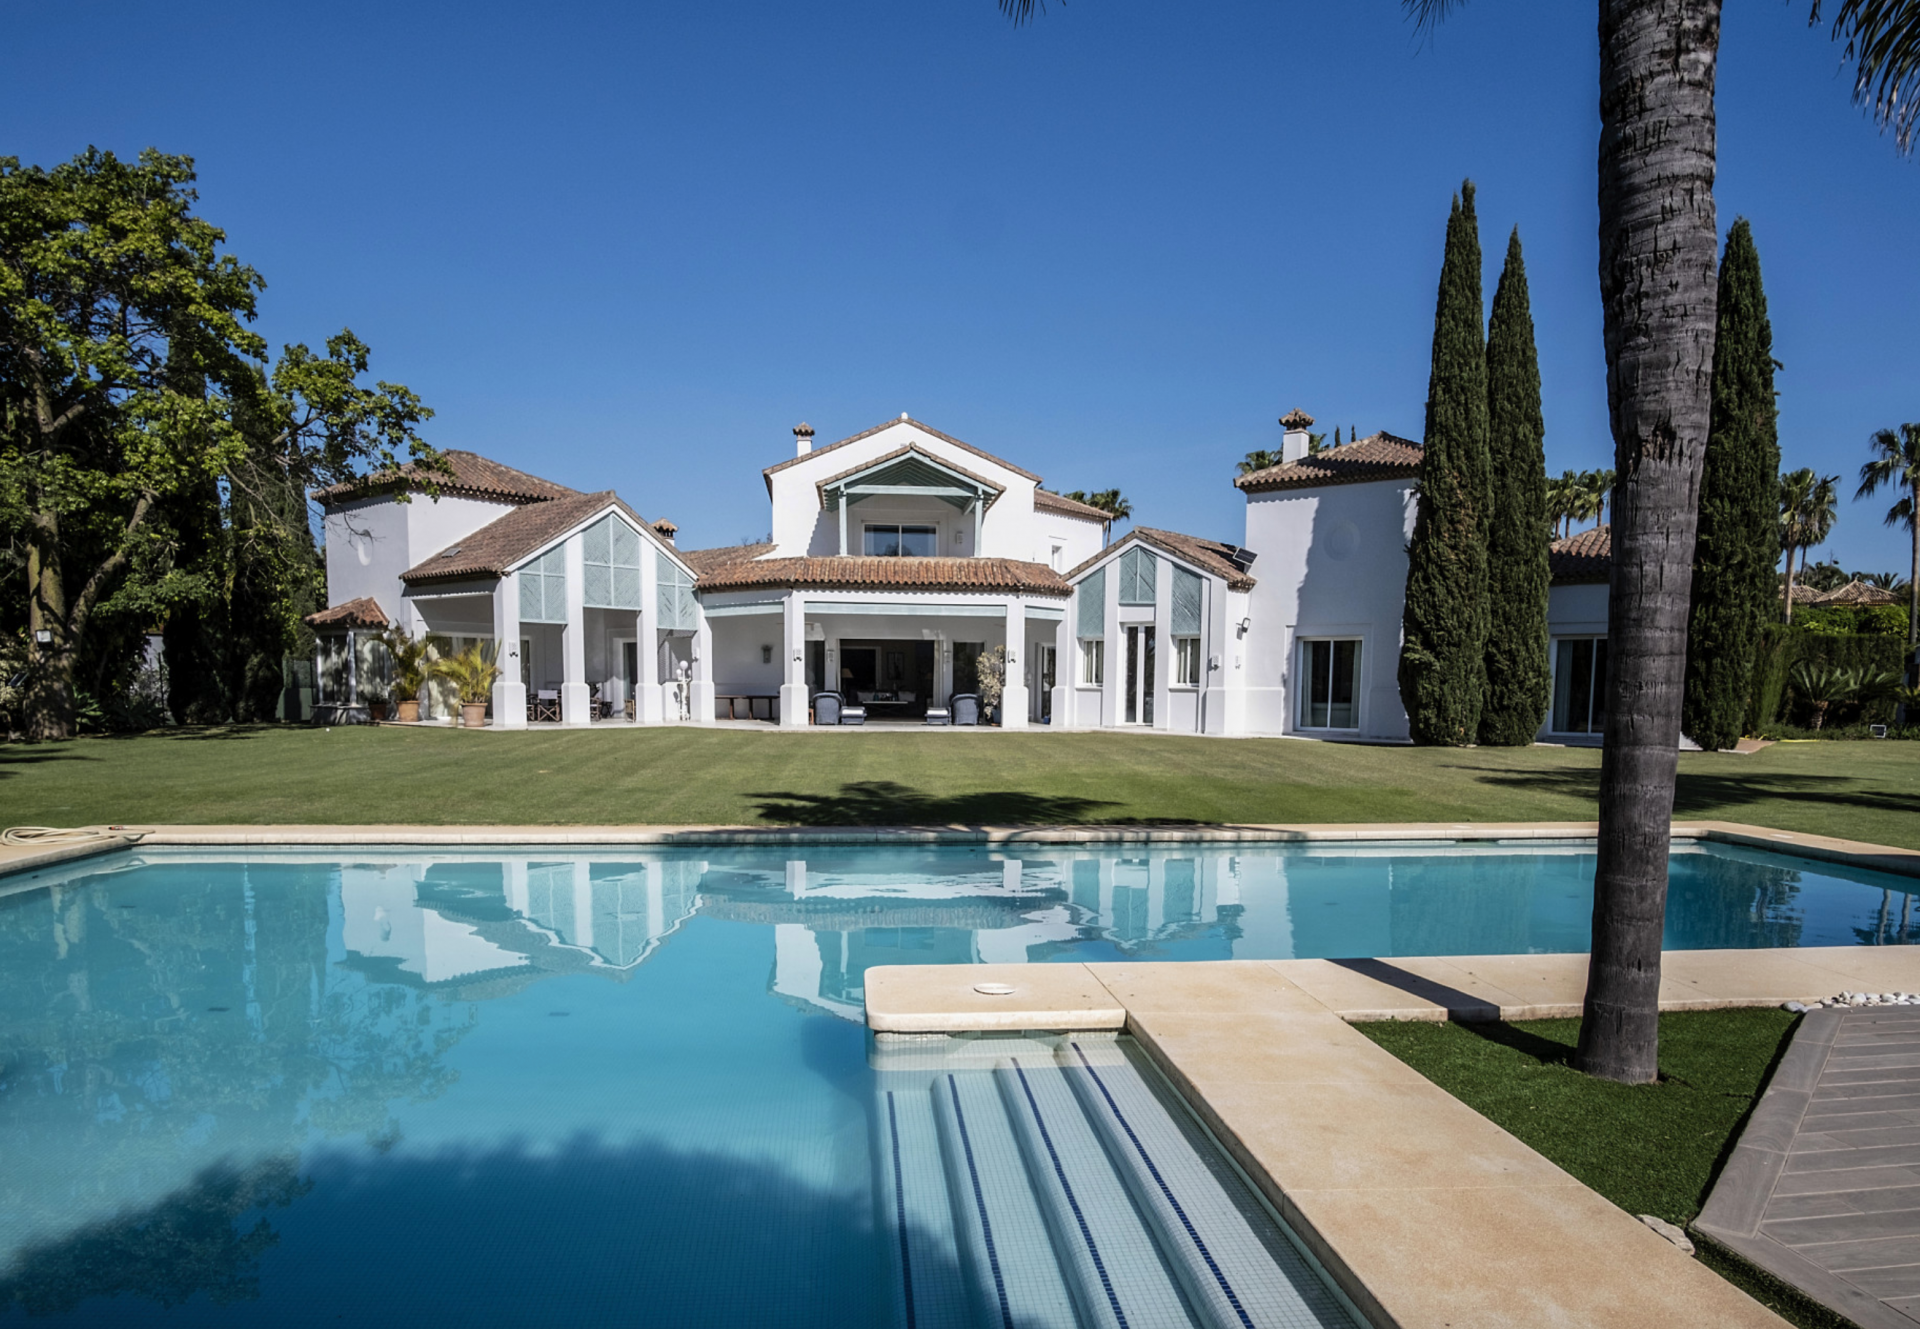 Magnificent villa in Guadalmina Baja, walking distance to the beach and amenities and only a short drive to Puerto Banus and Marbella.